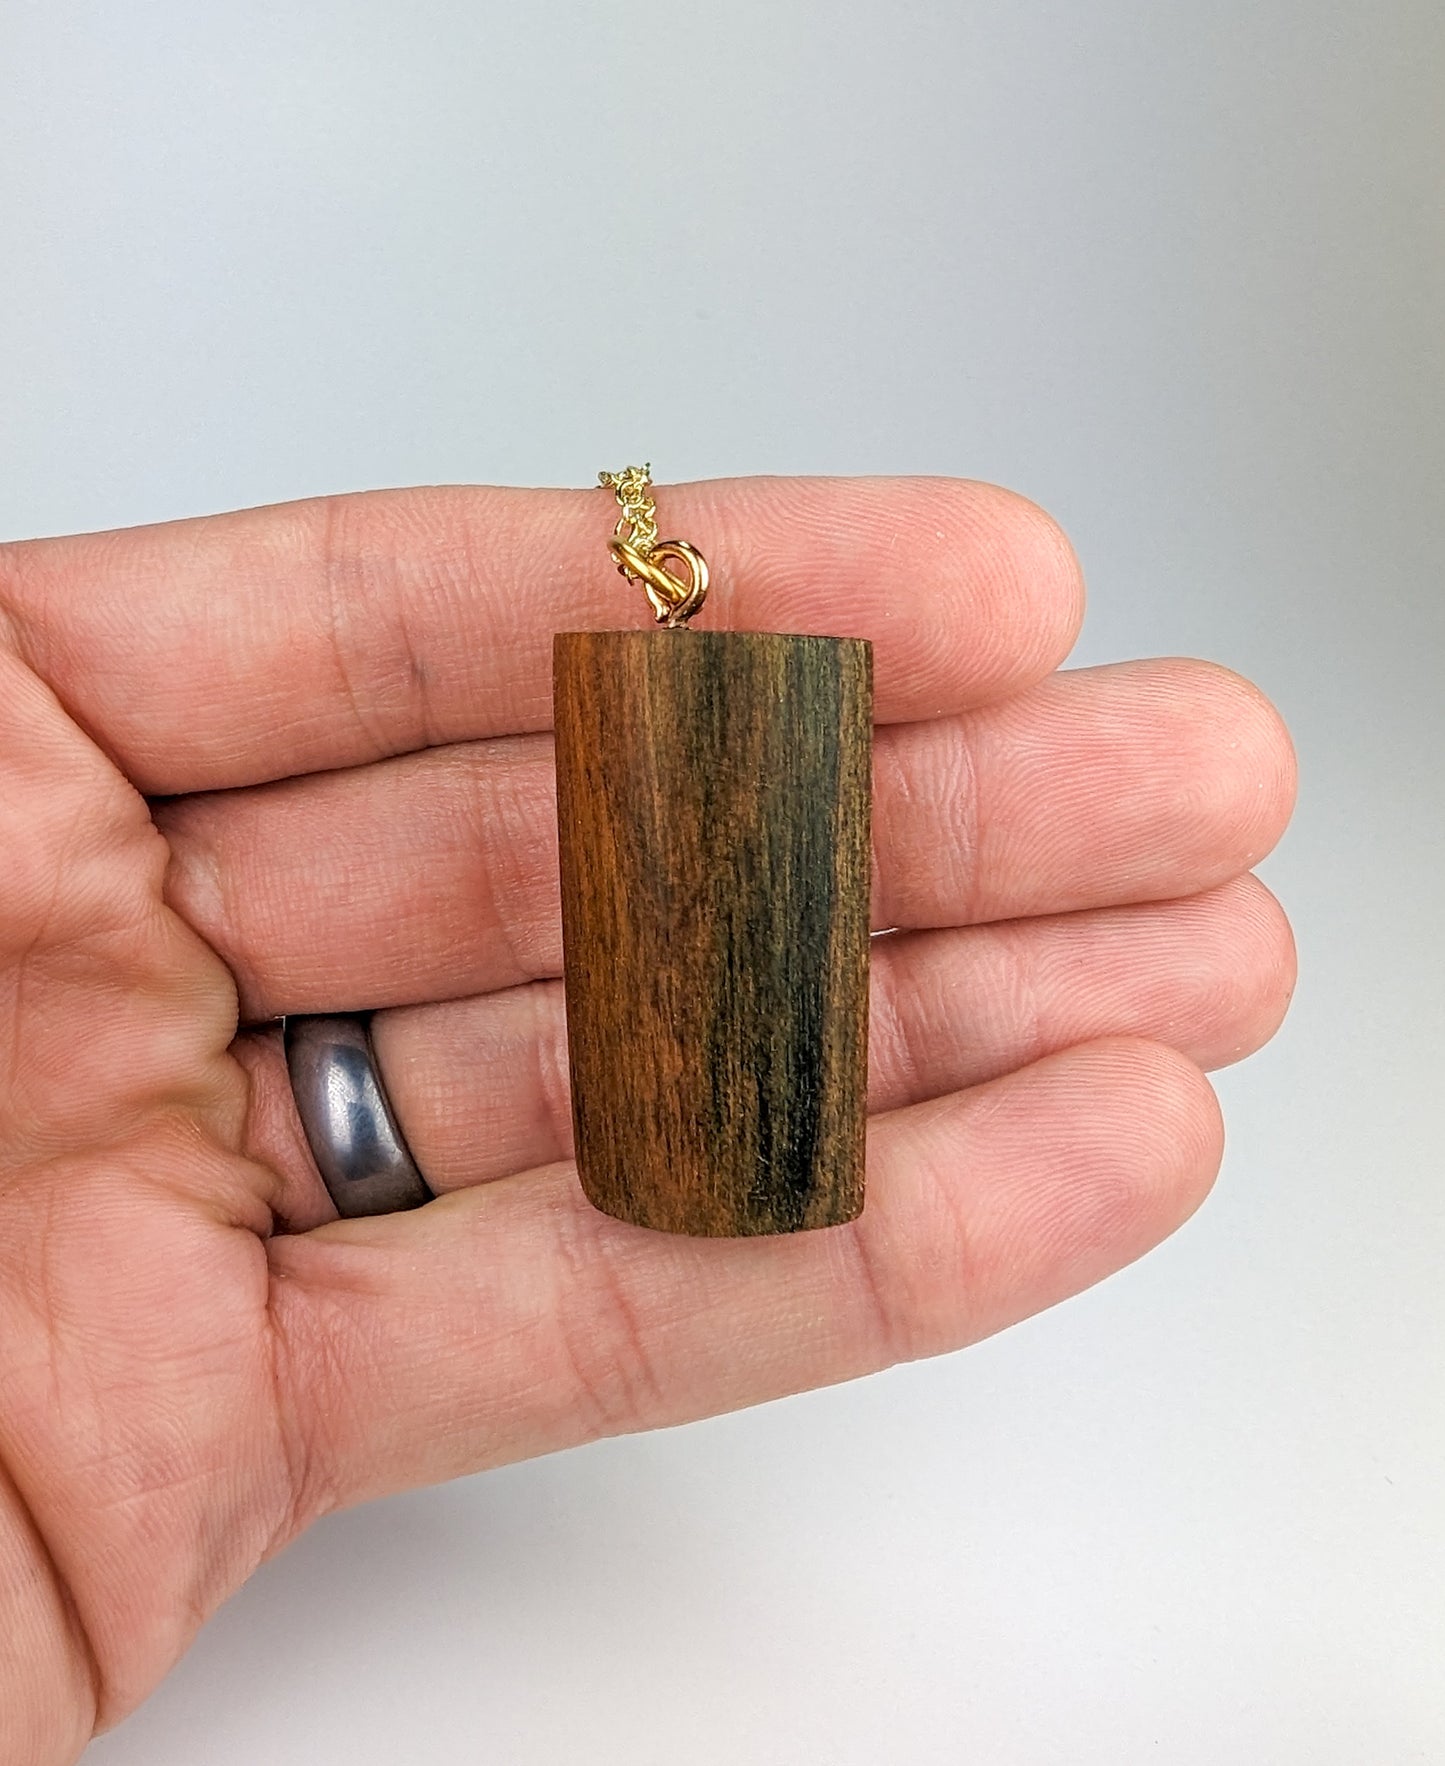 Naturally Fungus-Stained Wooden Pendant | Half Cylinder